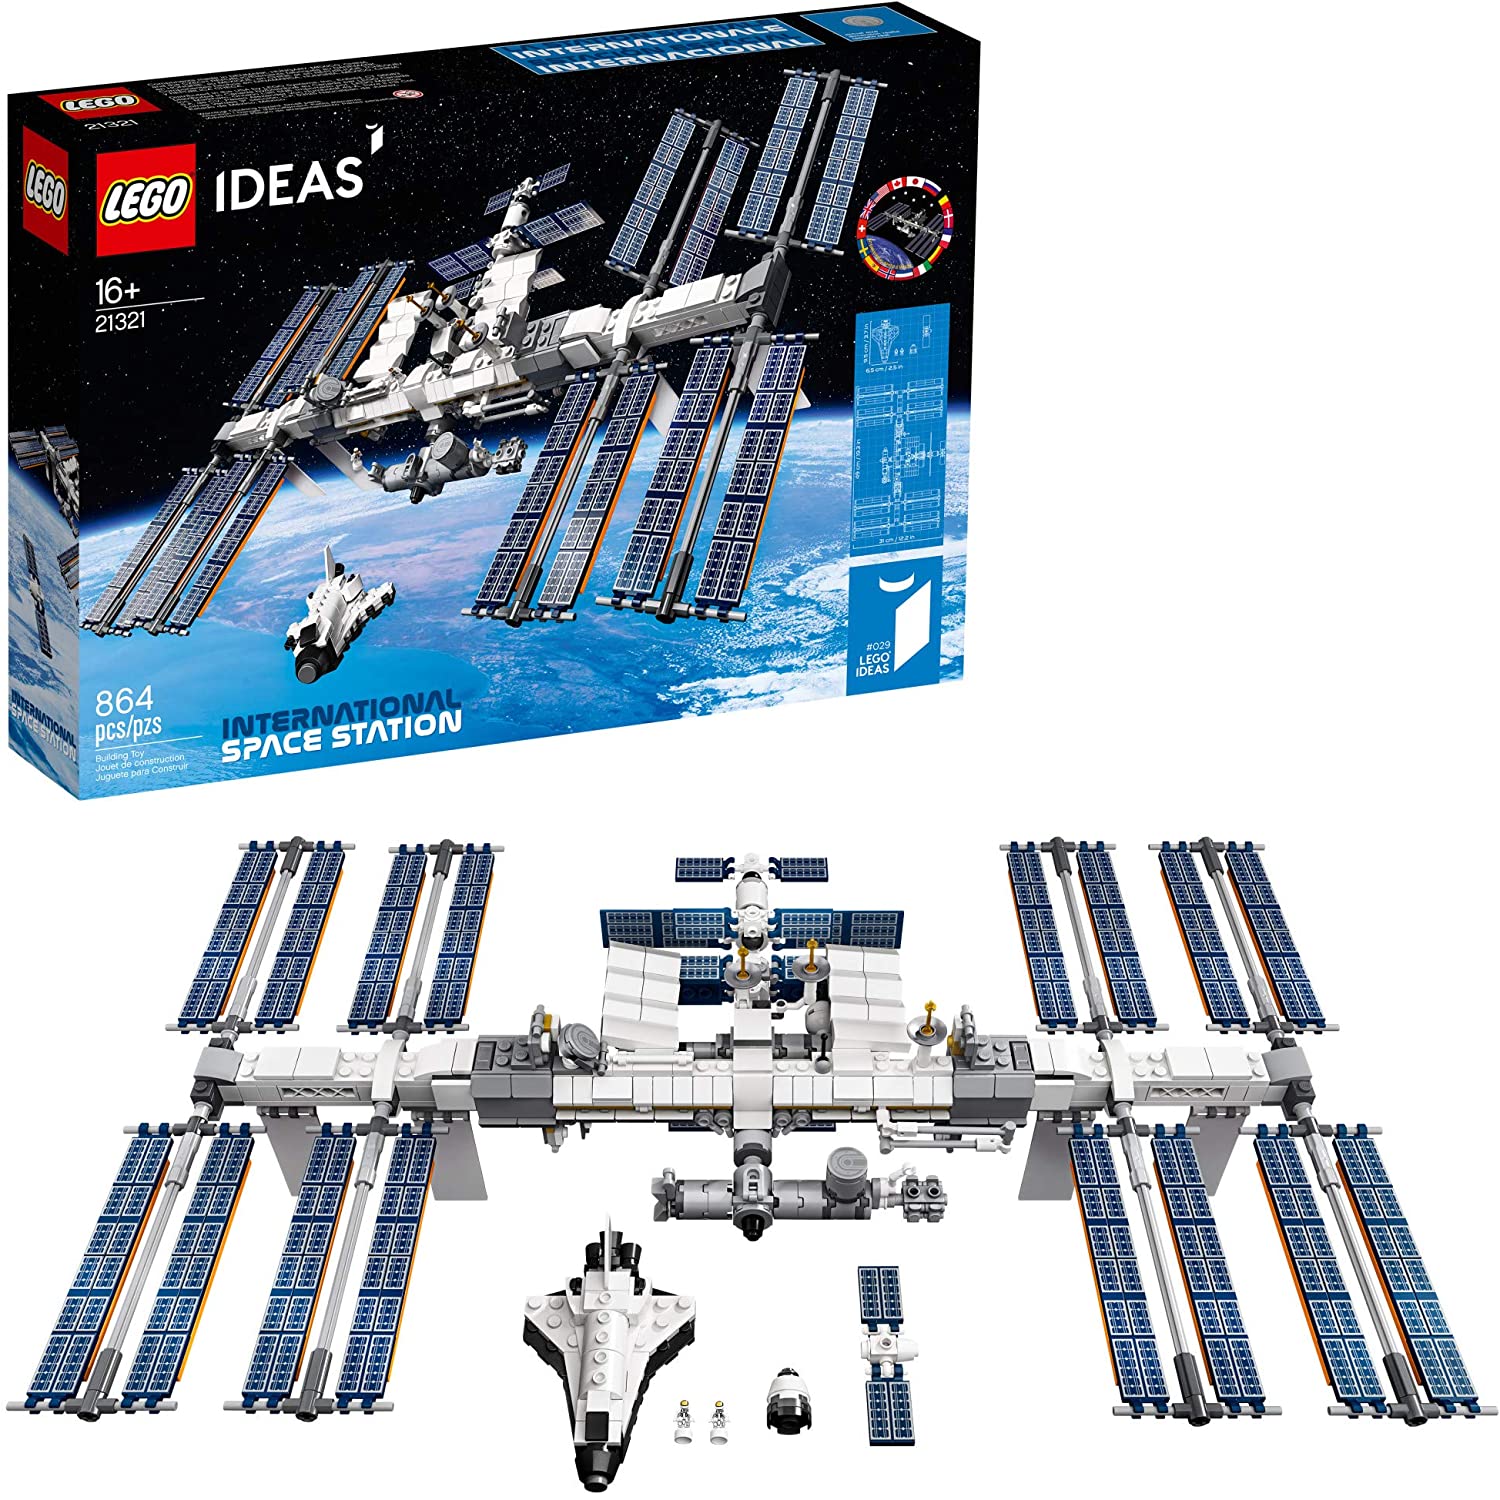 LEGO Ideas International Space Station Building Kit $55.99 + Free Shipping